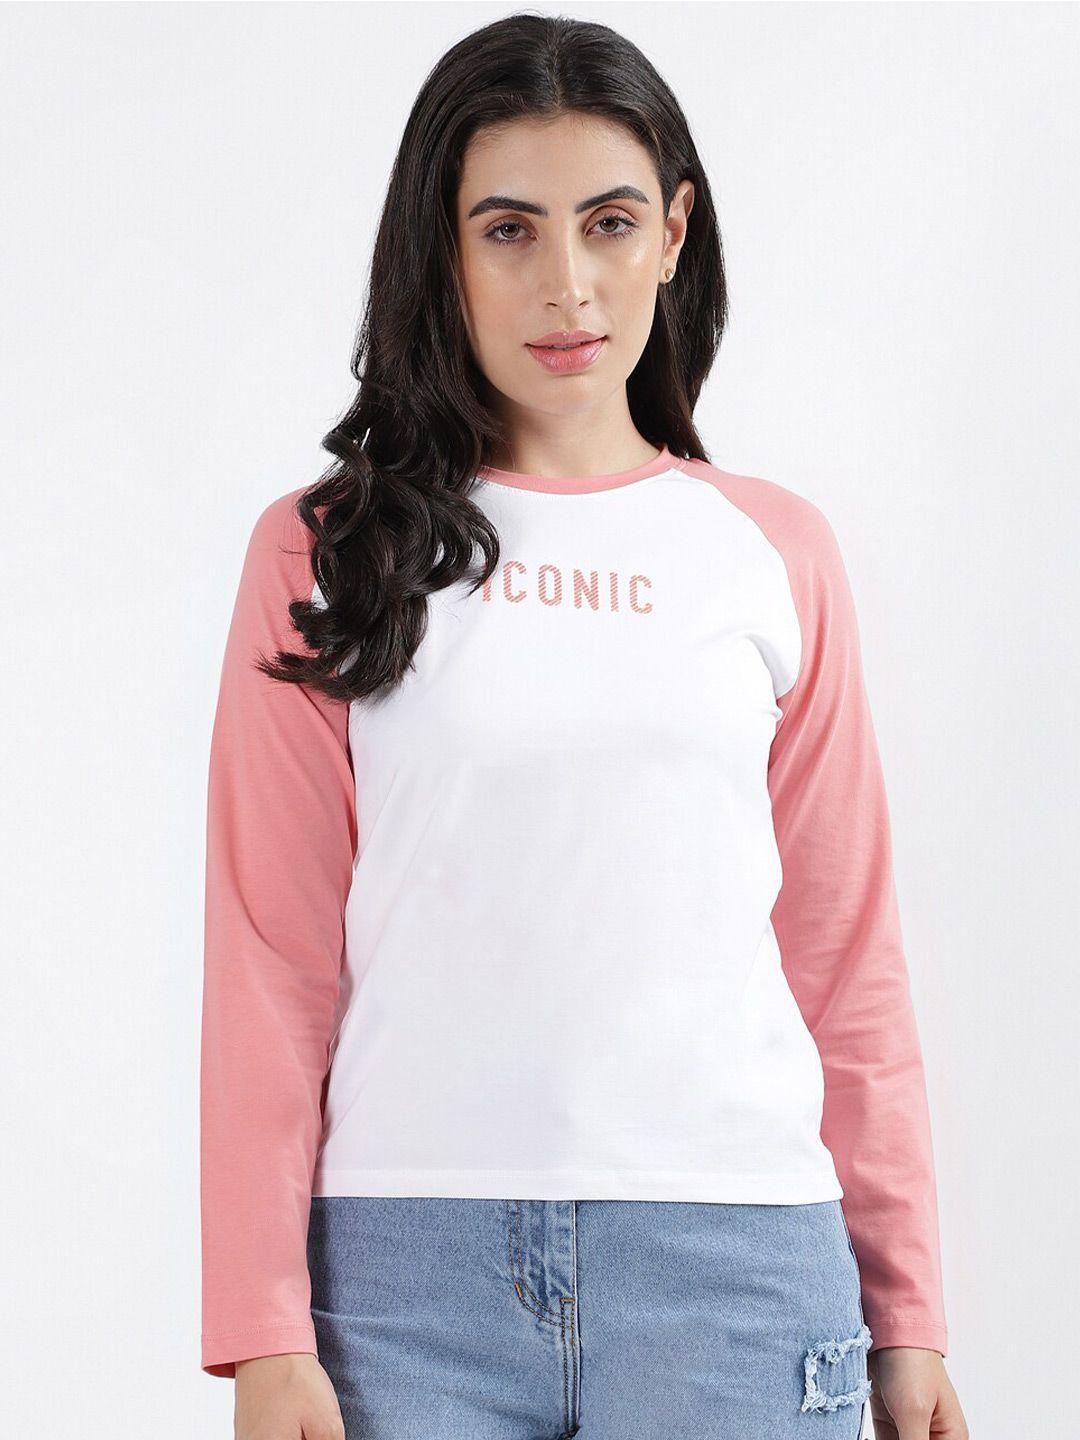 iconic-typography-printed-casual-t-shirt